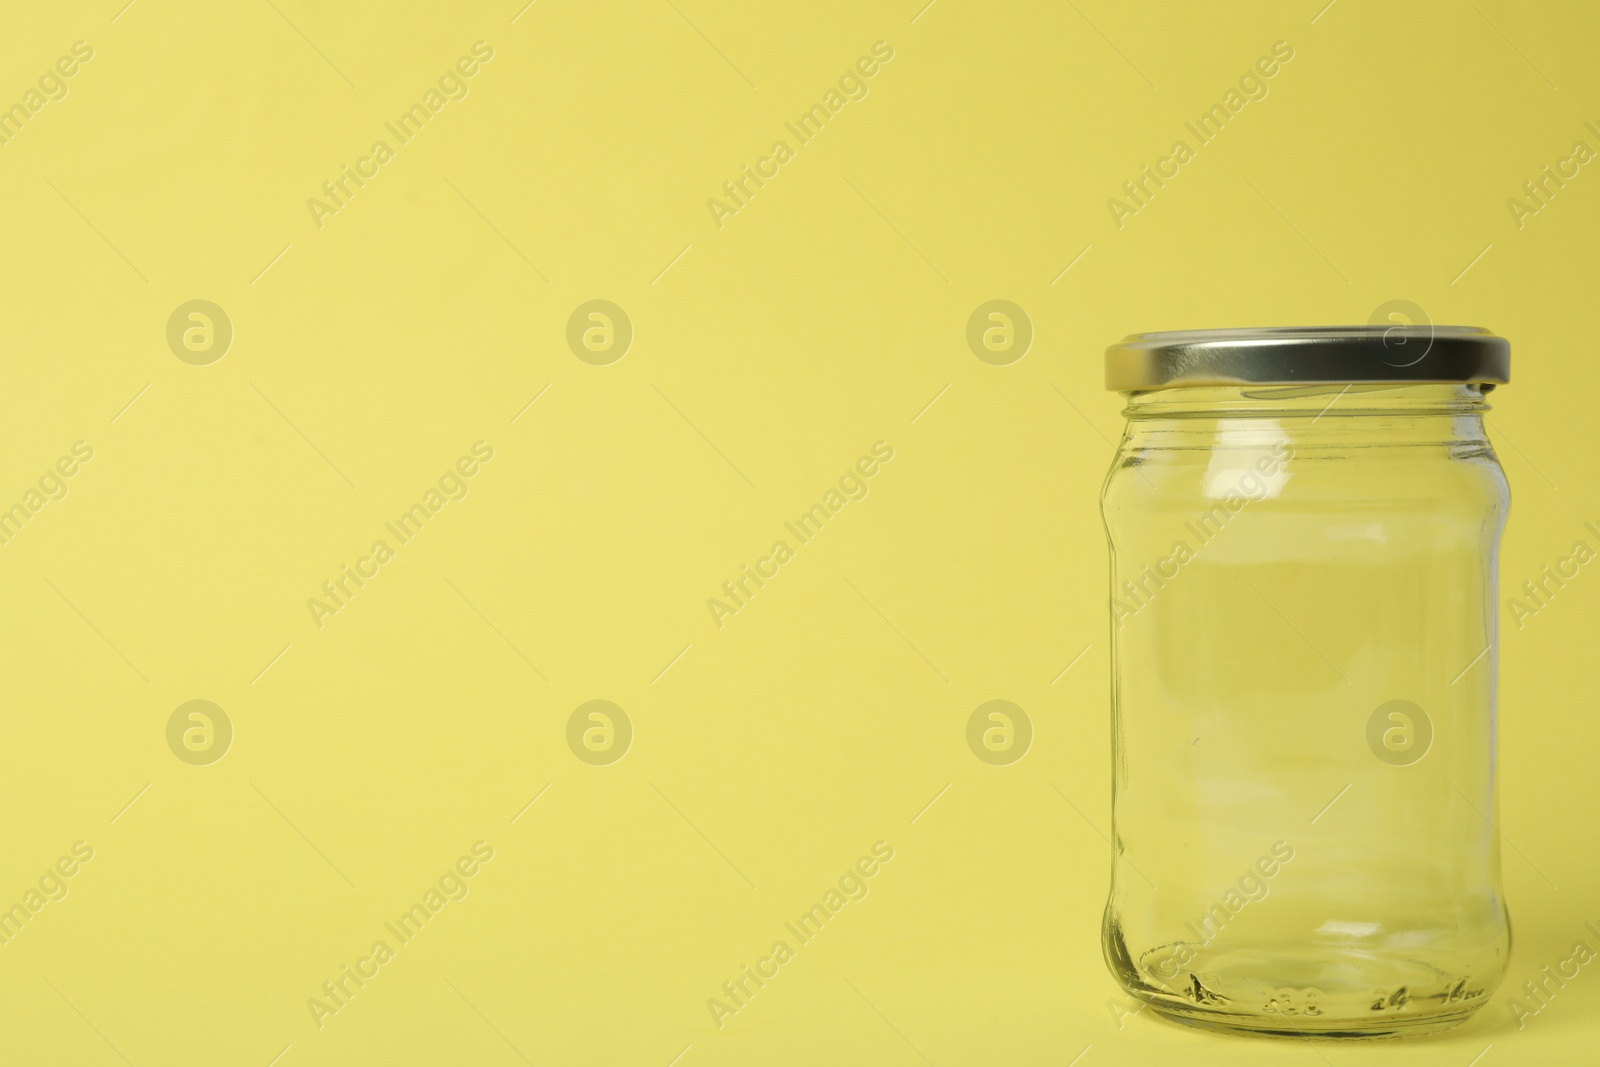 Photo of Closed empty glass jar on light yellow background, space for text